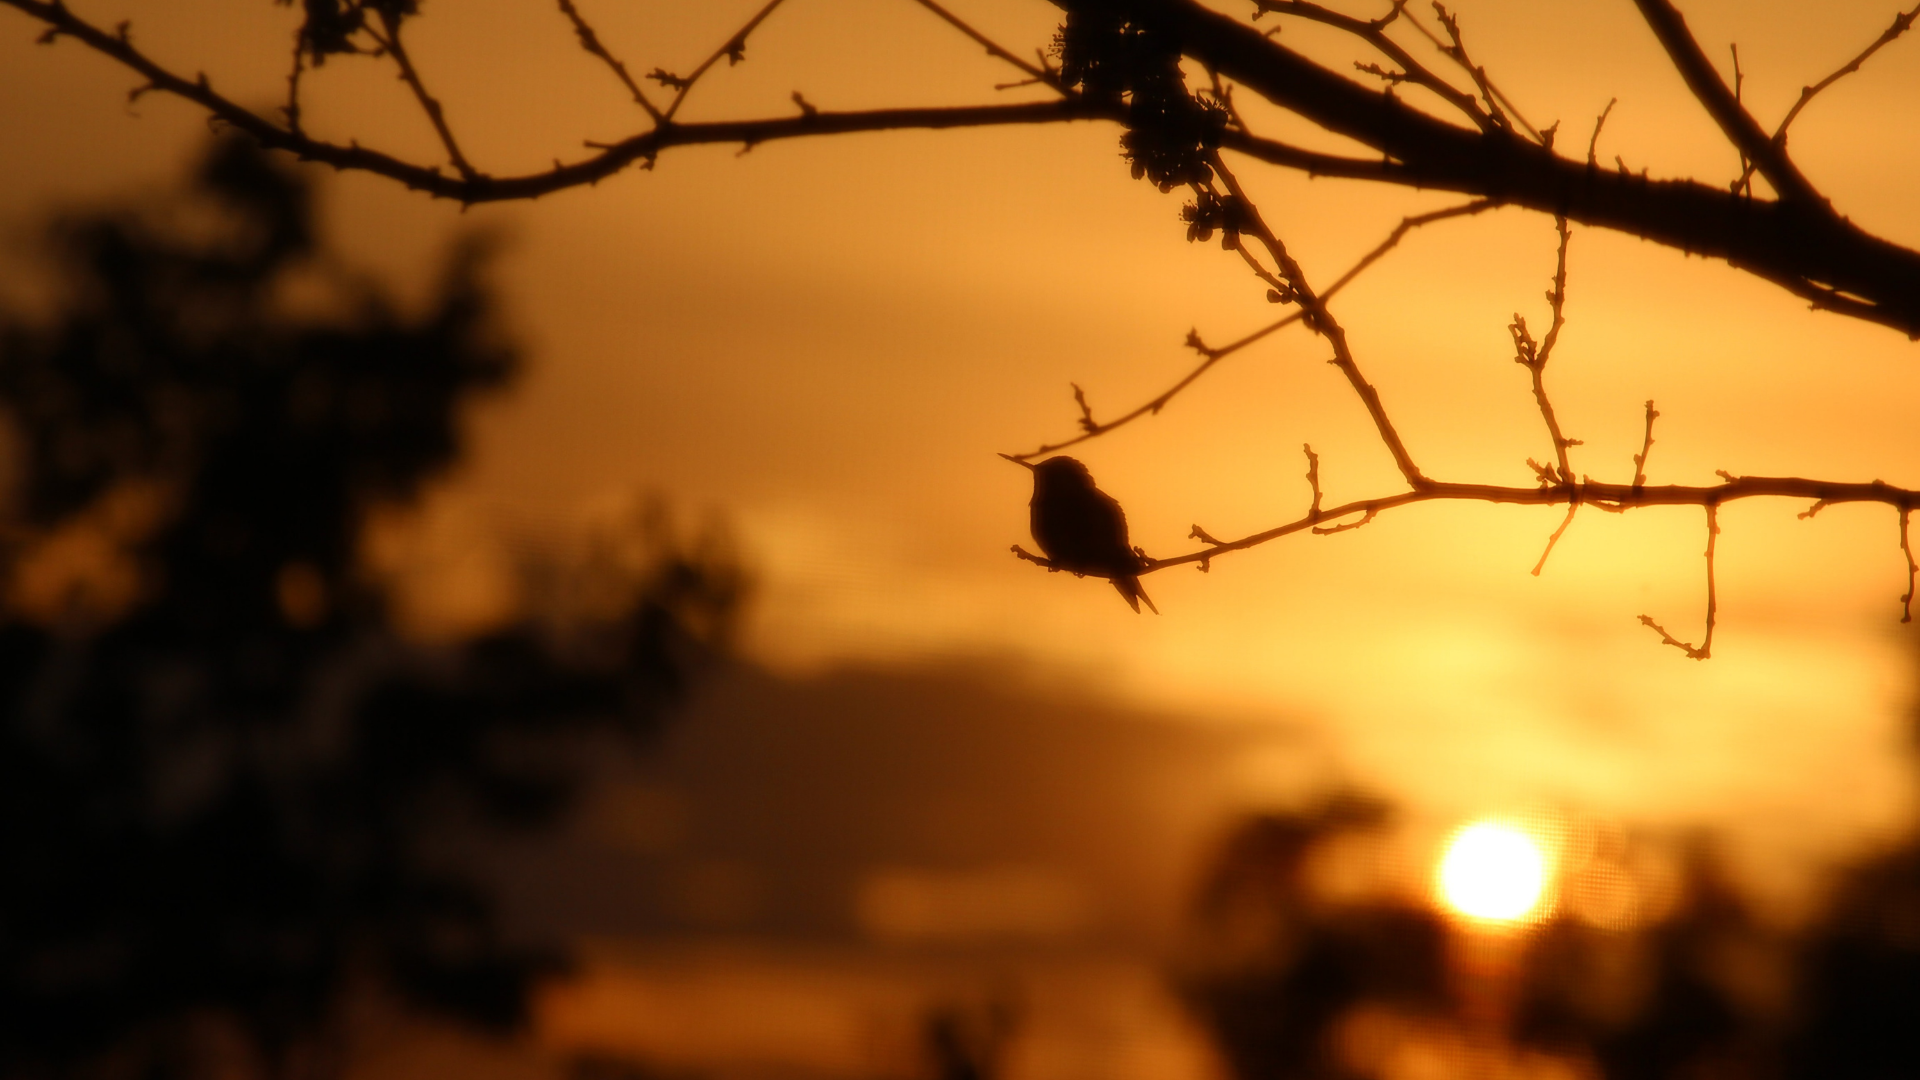 sun rising in the distance and a small bird perched on a small tree branch